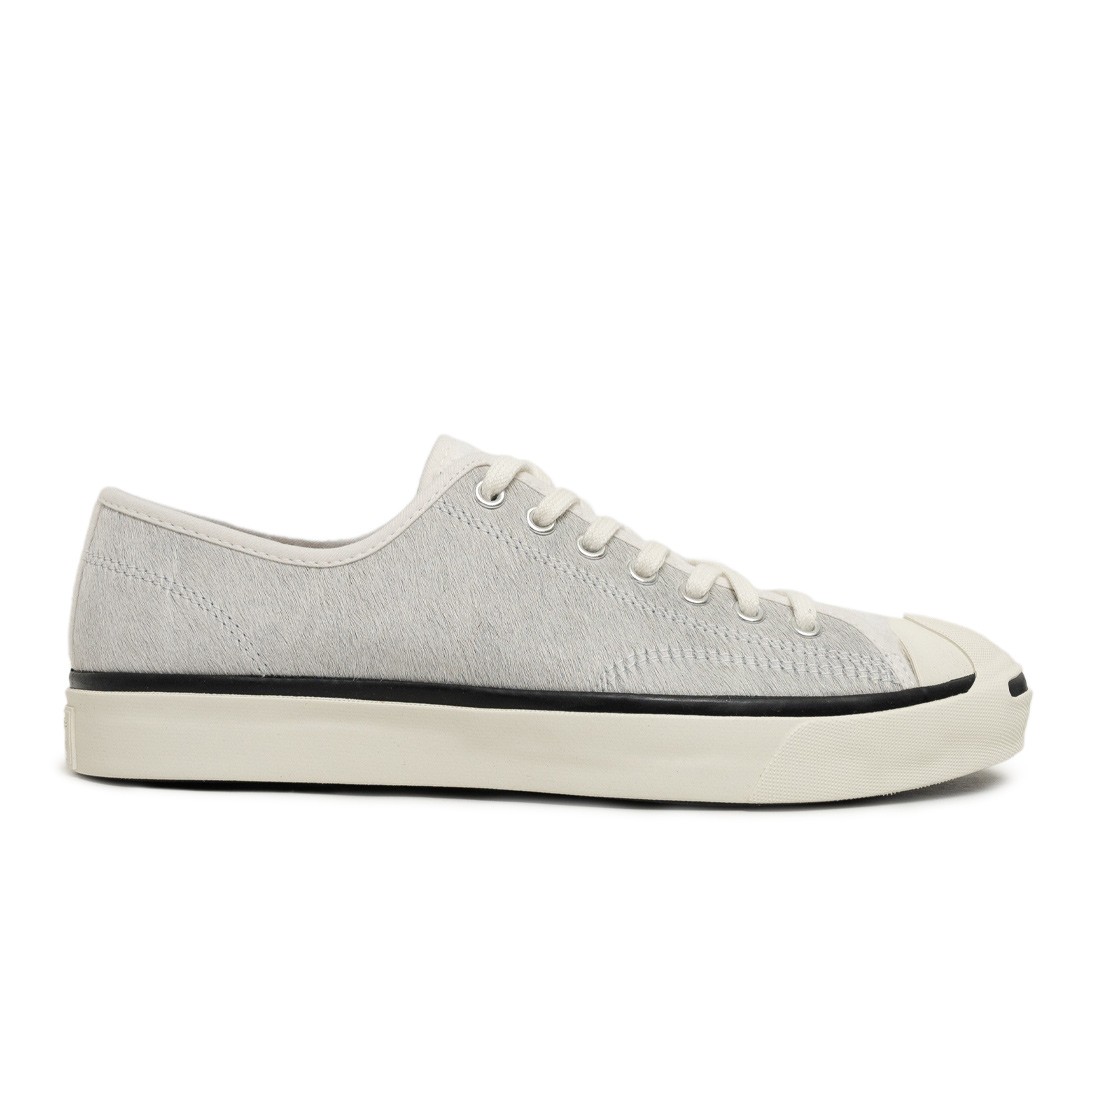 converse x clot jack purcell ox white